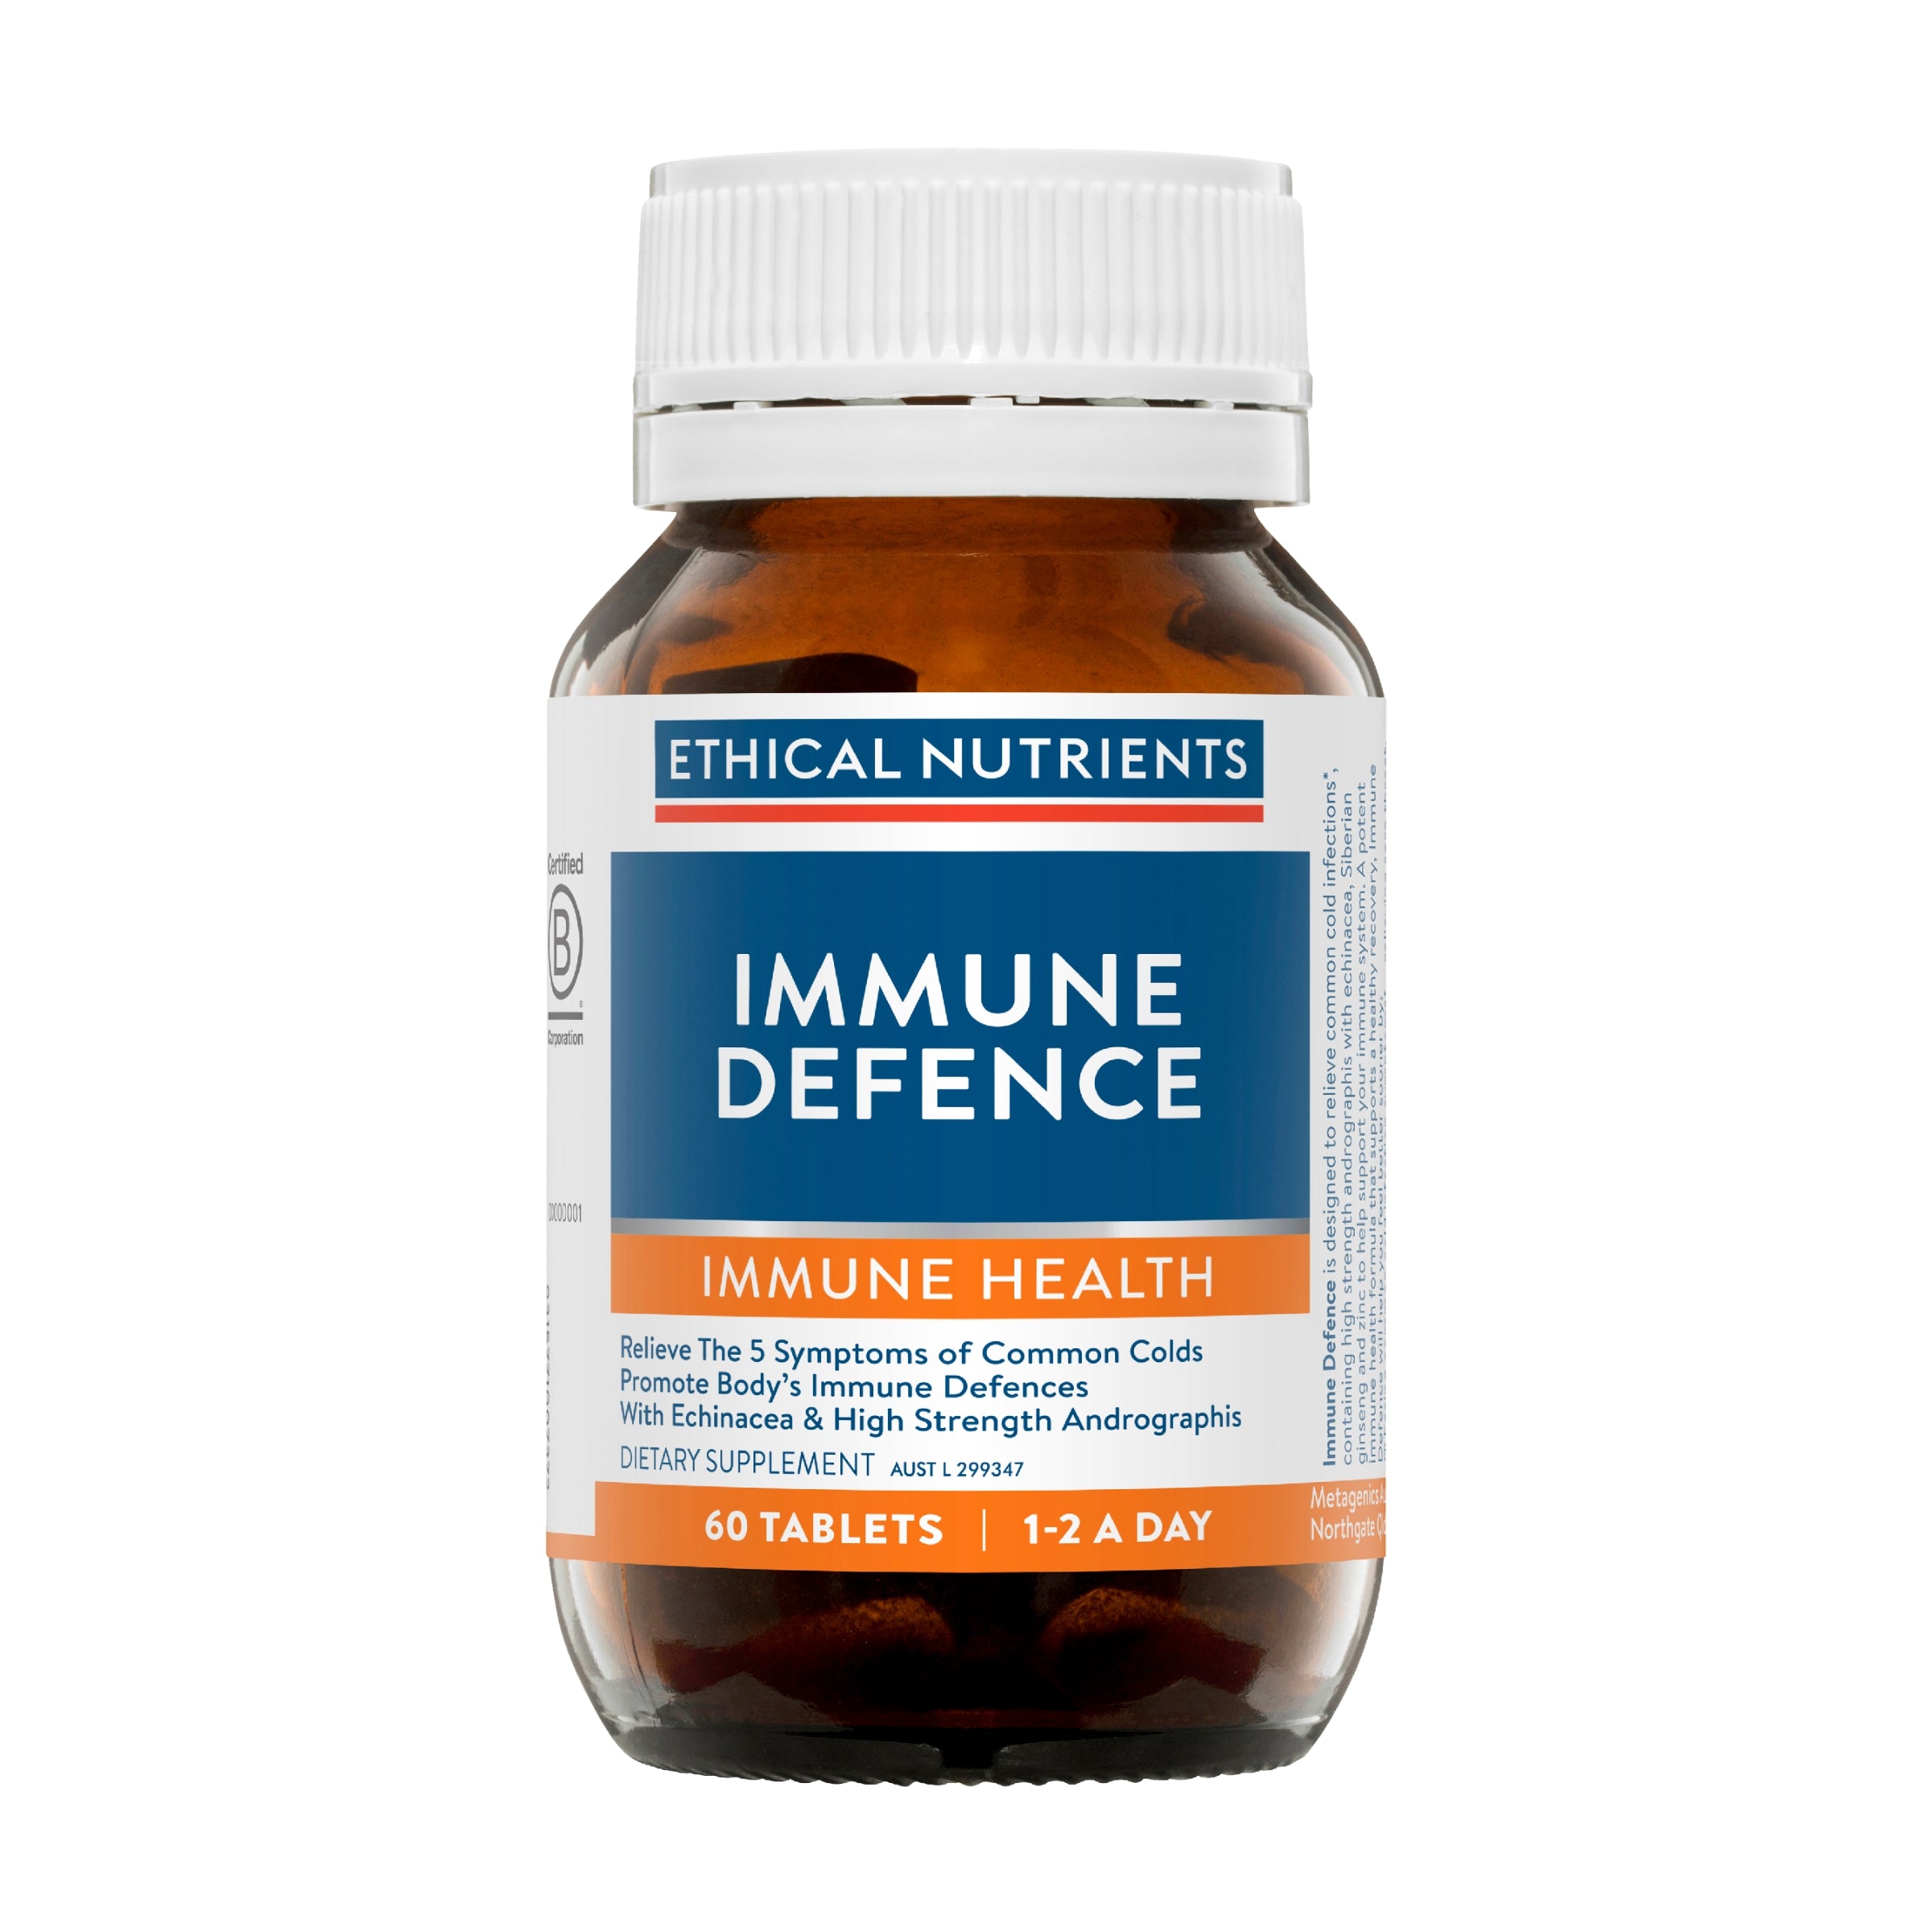 Ethical Nutrients Immune Defence 60 Capsules #size_60 capsules